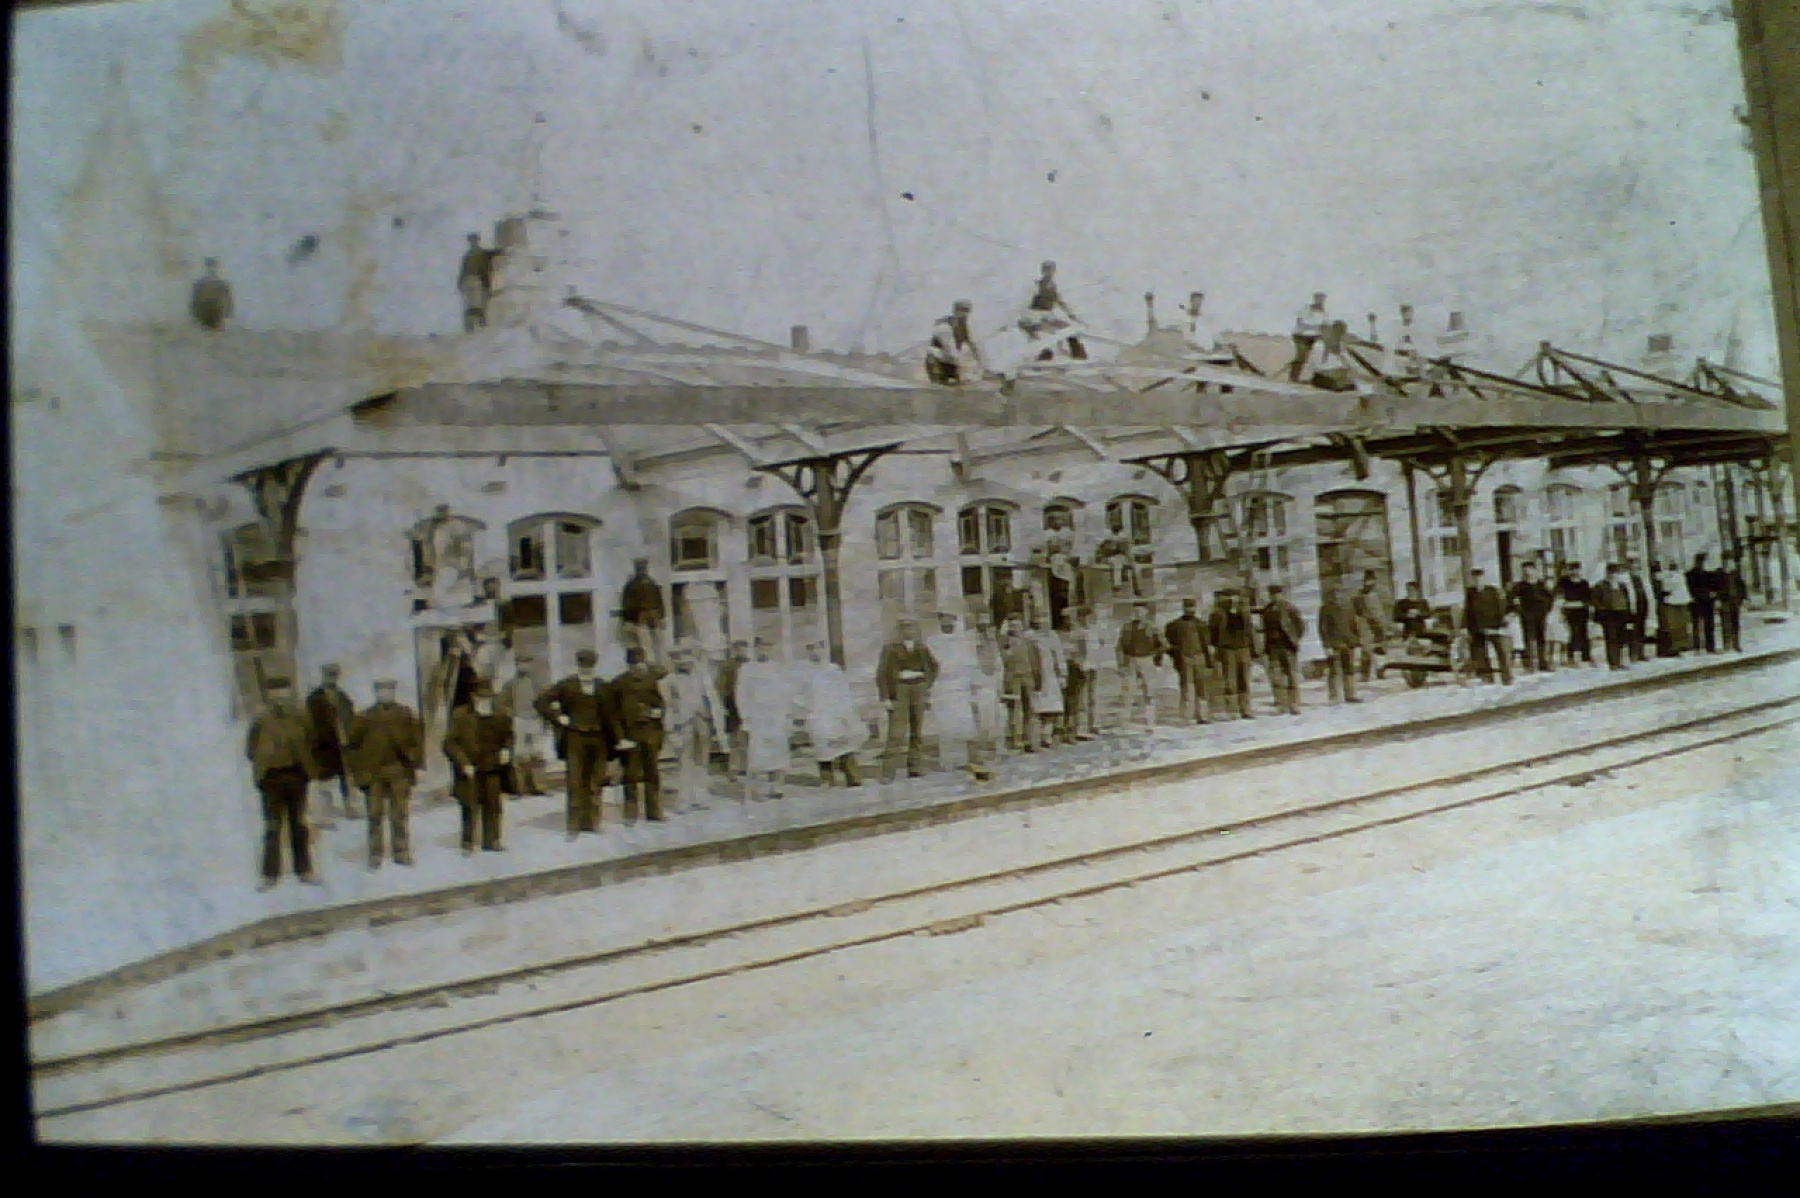 Staff and Workers at Aboyne Station circa 1896